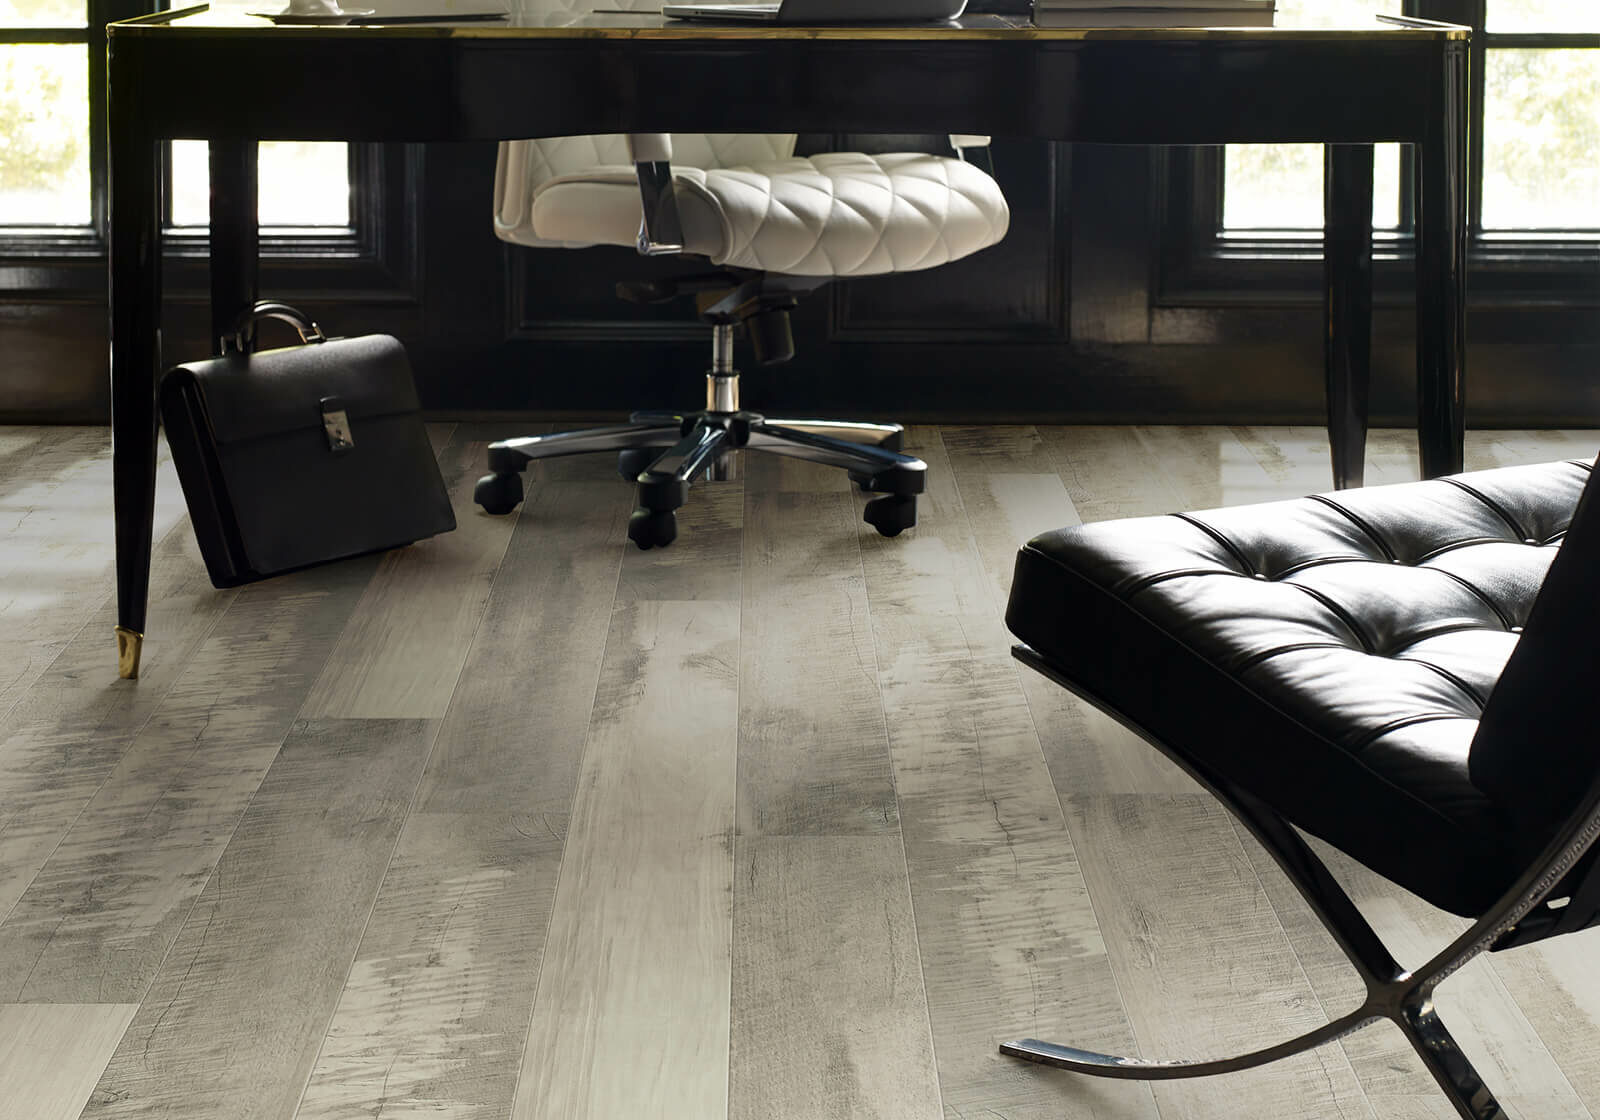 Laminate flooring in home office | Big Bob's Flooring Outlet Ohio